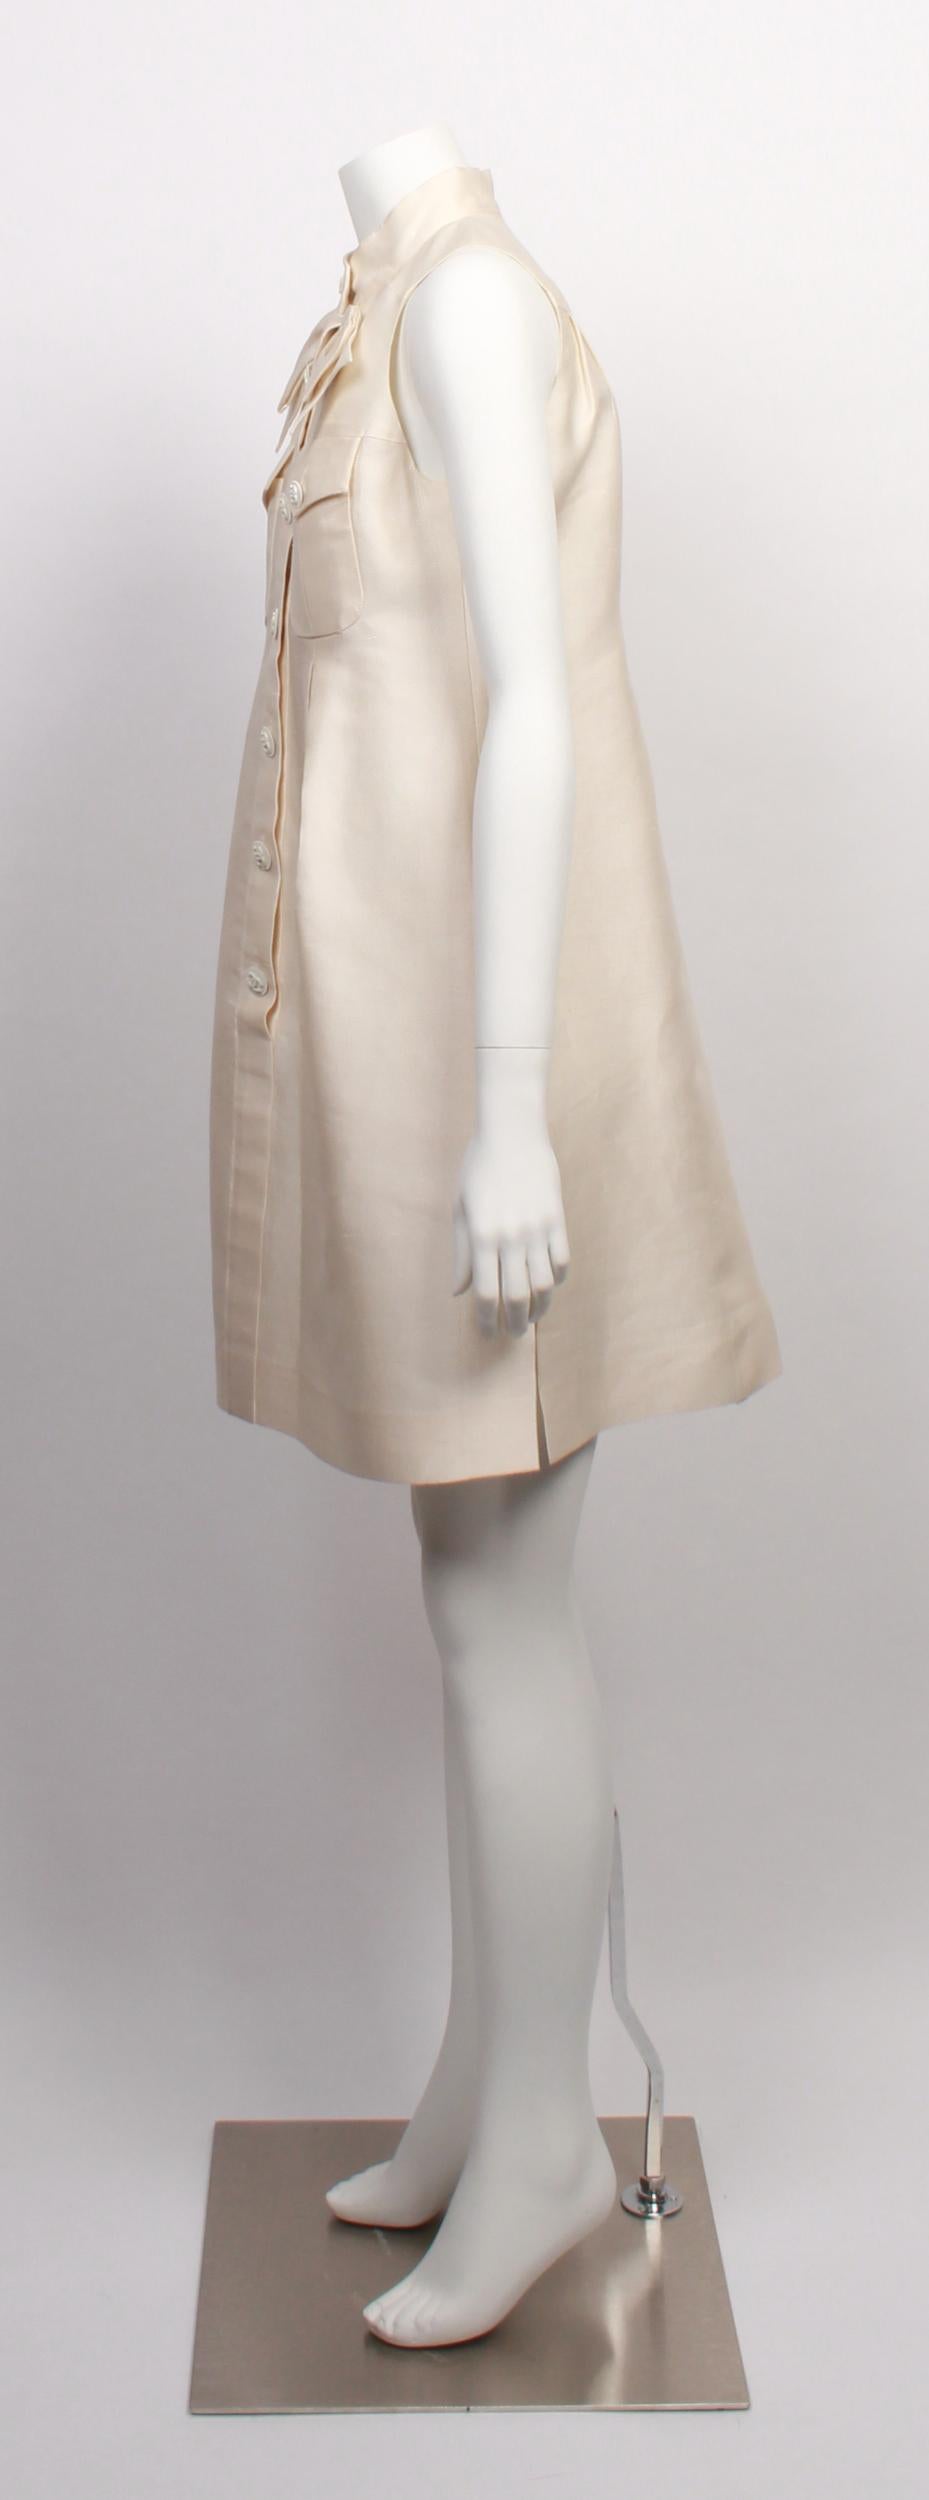 Women's Chanel Dress With Bow From the 09 Spring Collection